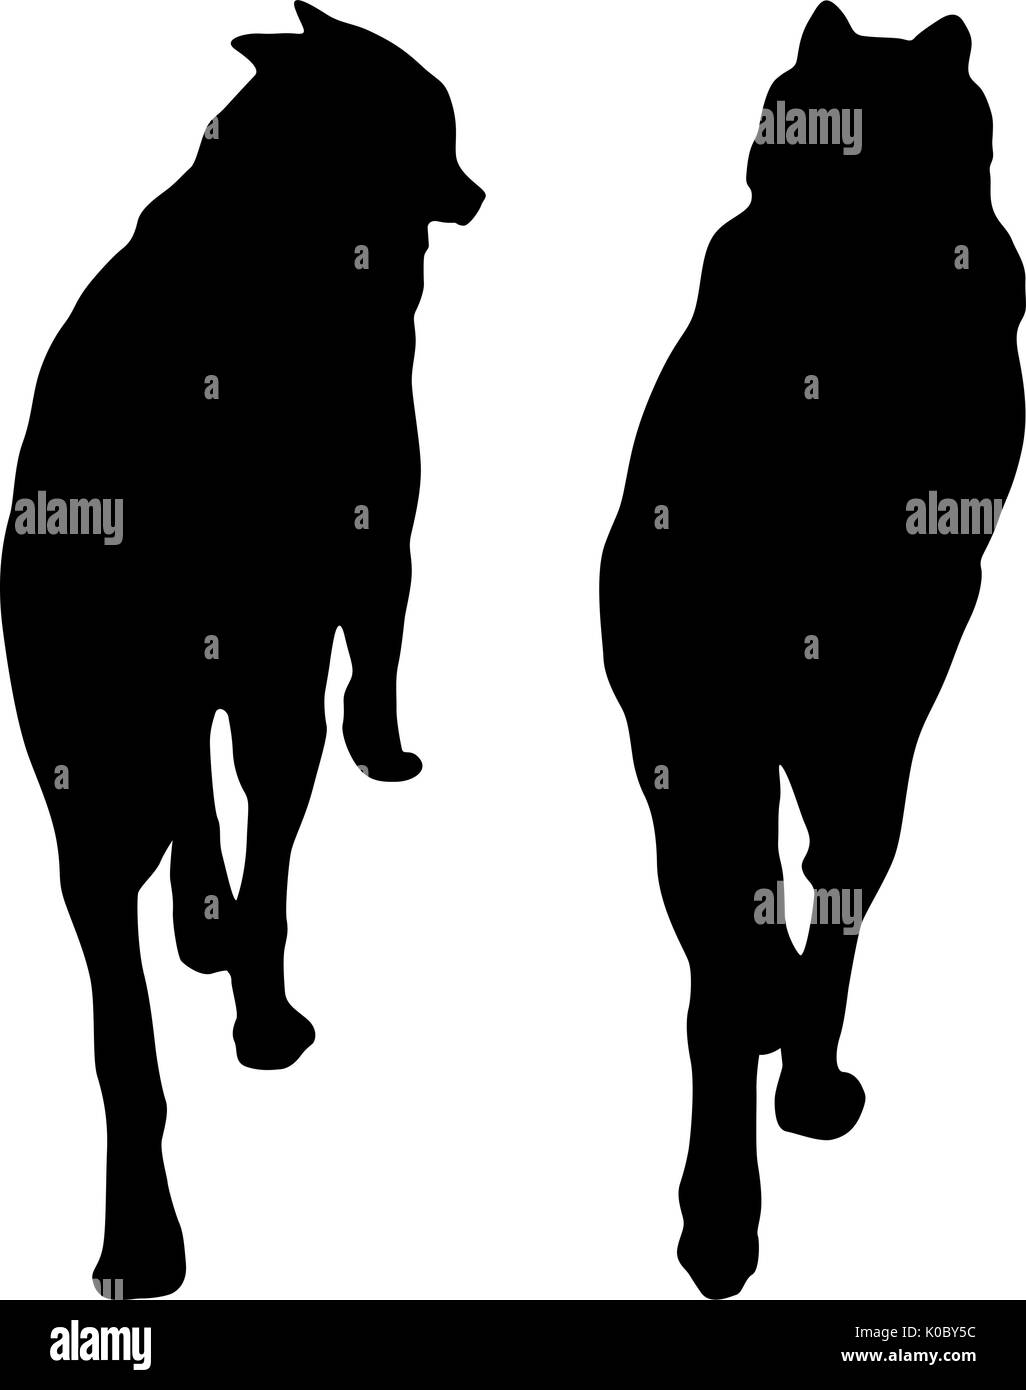 Shepherd dog silhouette on a white background Stock Vector